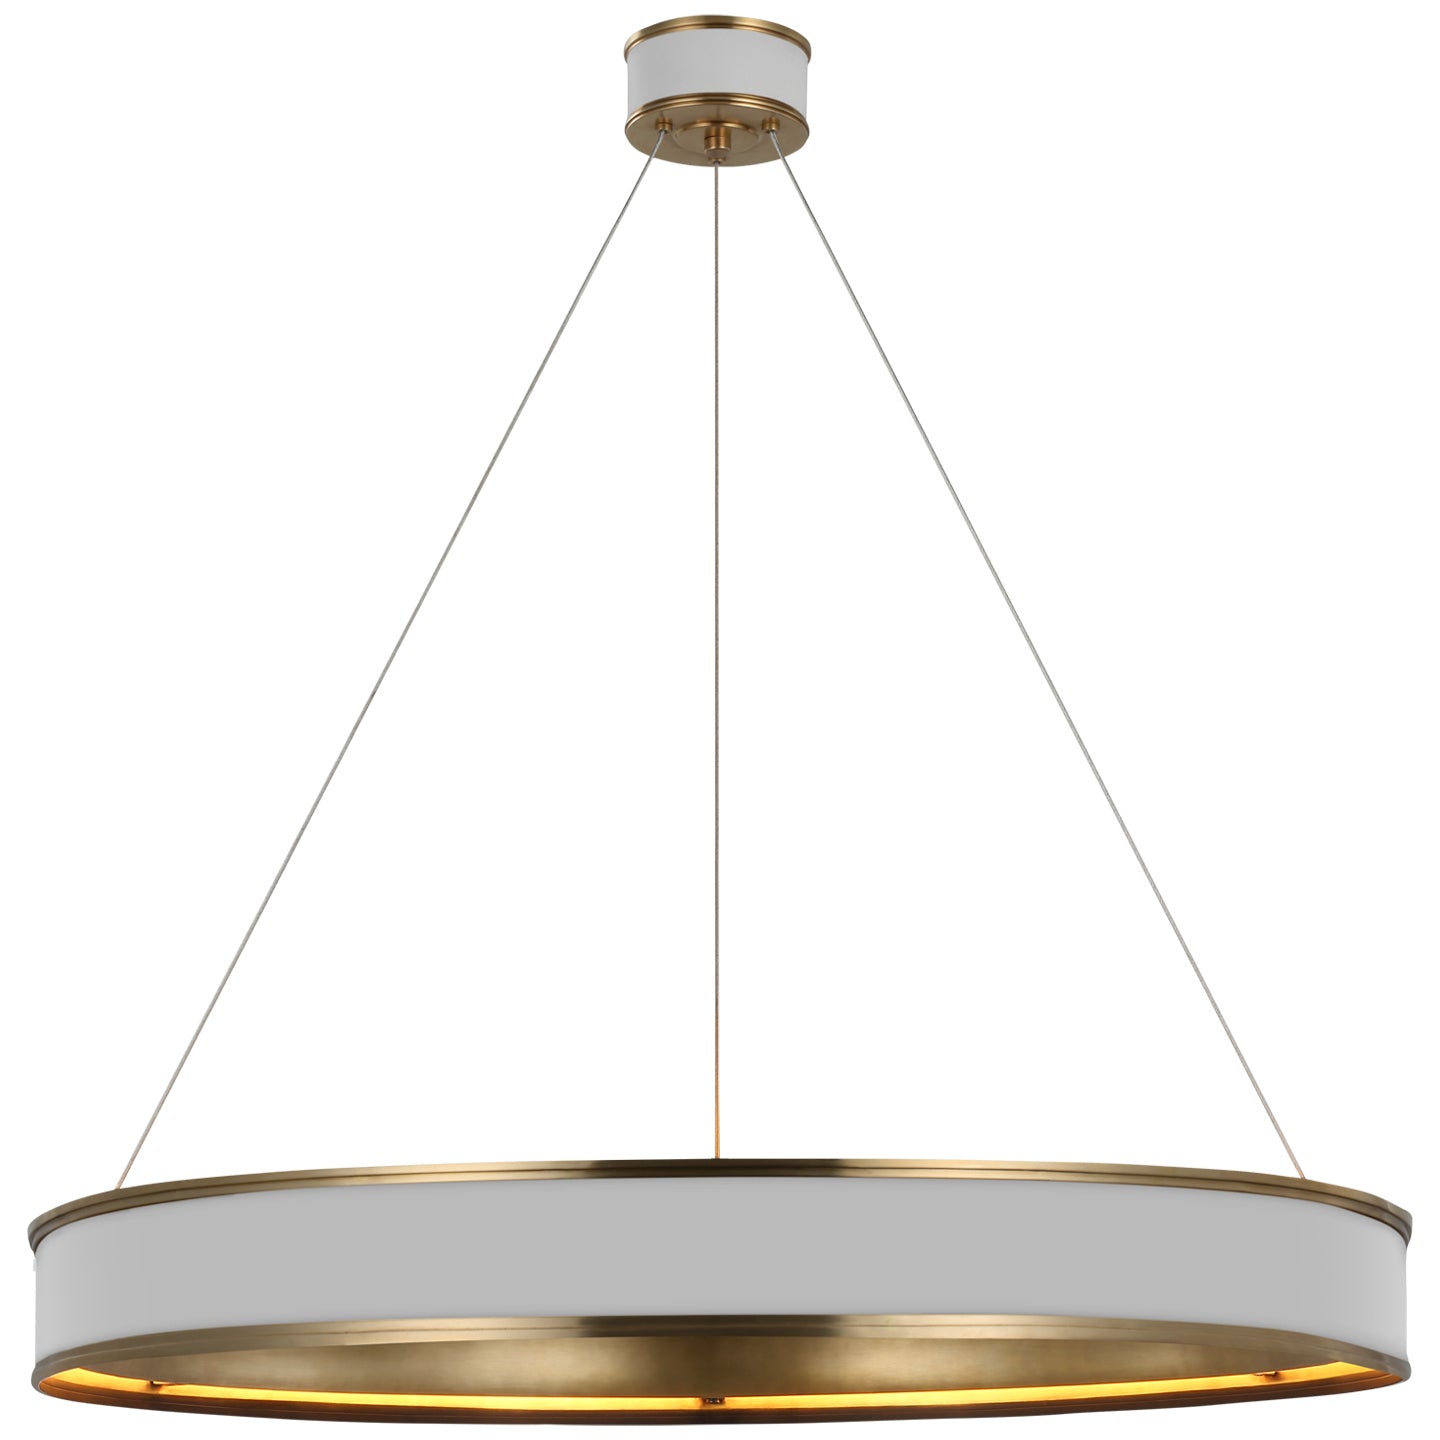 Visual Comfort Signature Canada - LED Chandelier - Connery - Matte White and Antique-Burnished Brass- Union Lighting Luminaires Decor